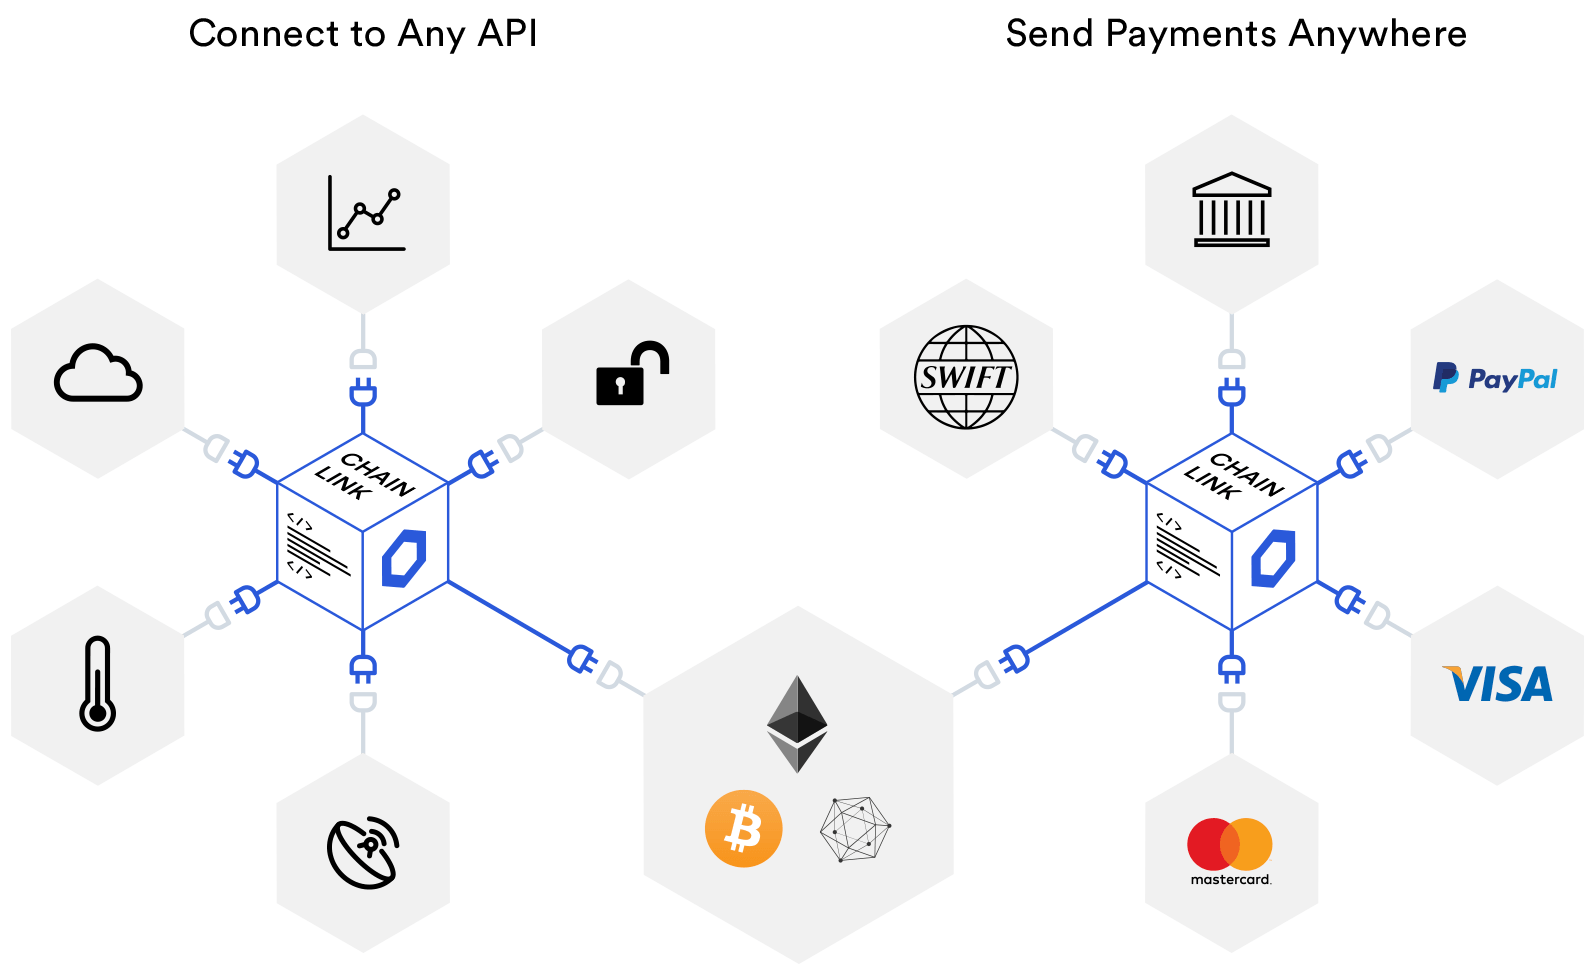 Chainlink oracles connect smart contracts on any blockchain to any input and output